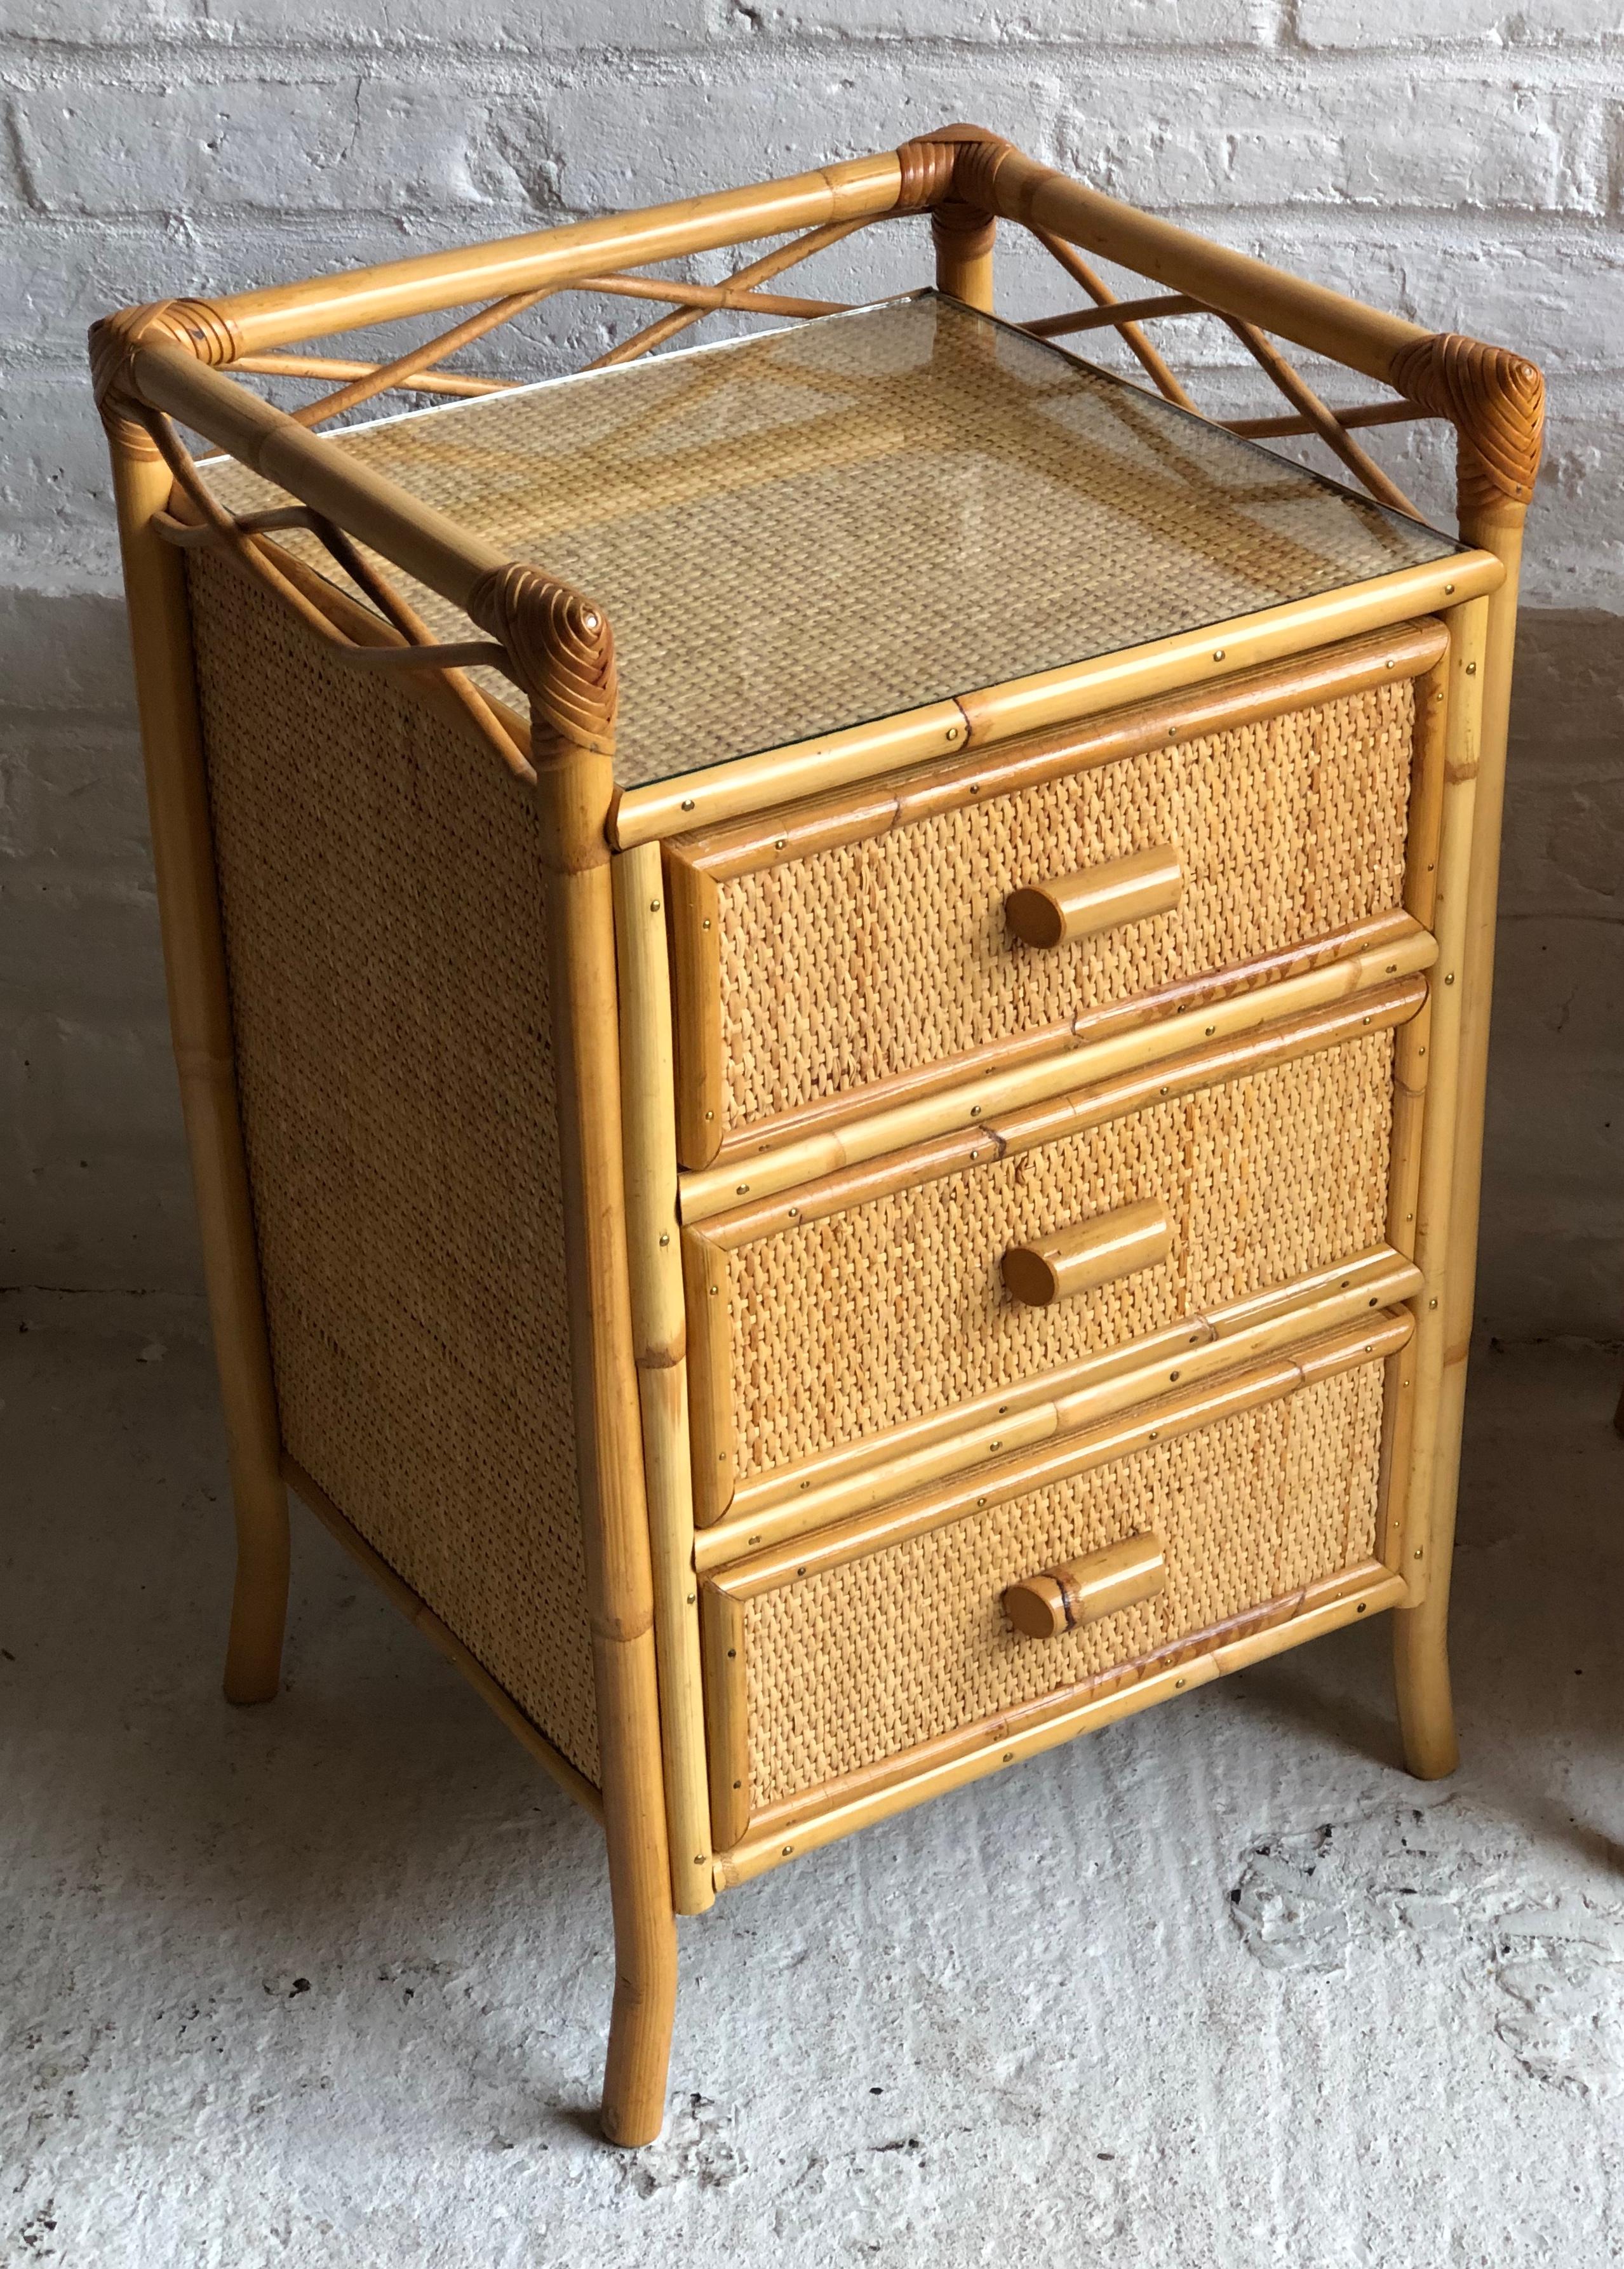 Pair of midcentury rattan / cane nightstands / bedside drawers by Angraves, England, 1970s.

This is a beautiful, natural in color pair of rattan / cane bedside drawers, nightstands.
Made by English company ‘Angraves’ of Leicester

Each